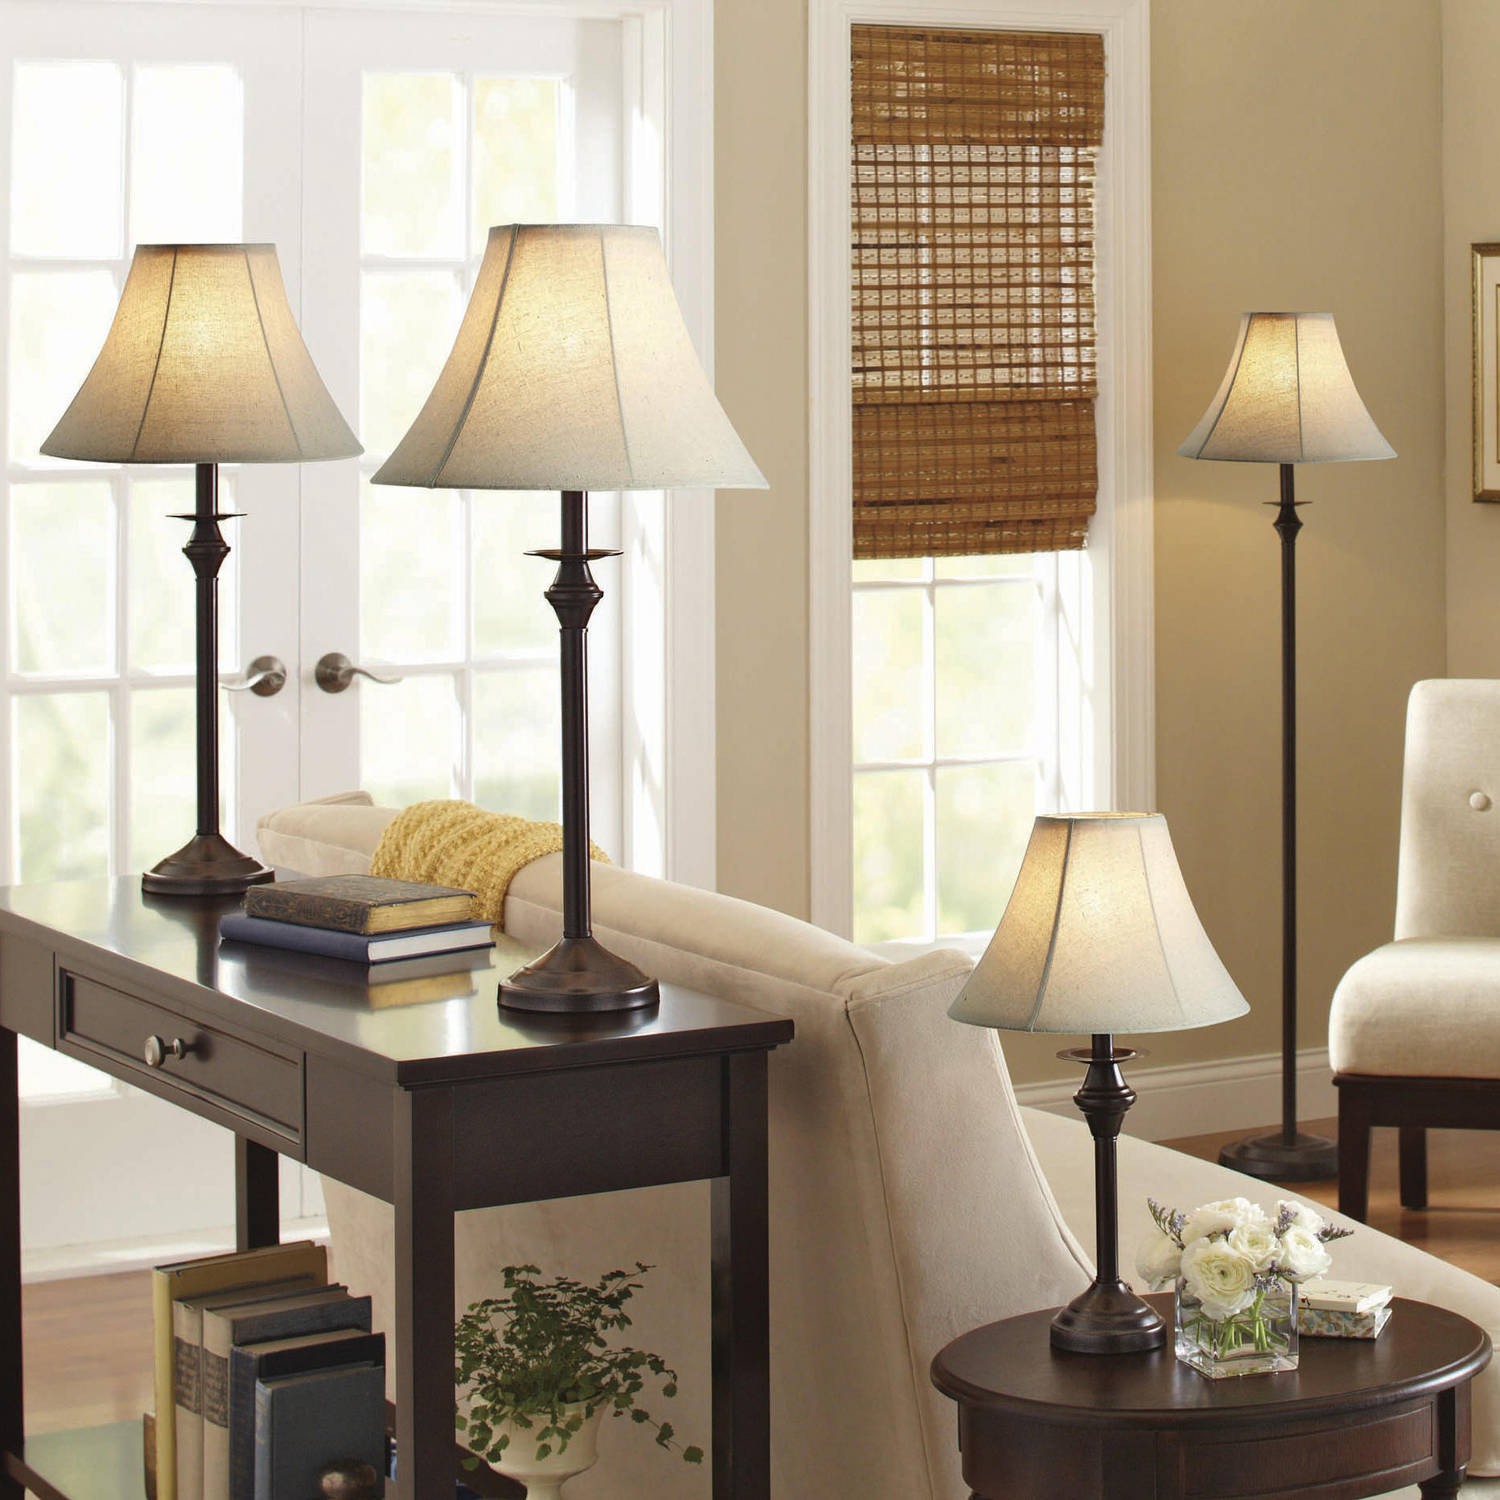 Better Homes and Gardens 4 Piece Lamp Set Only $49.98!